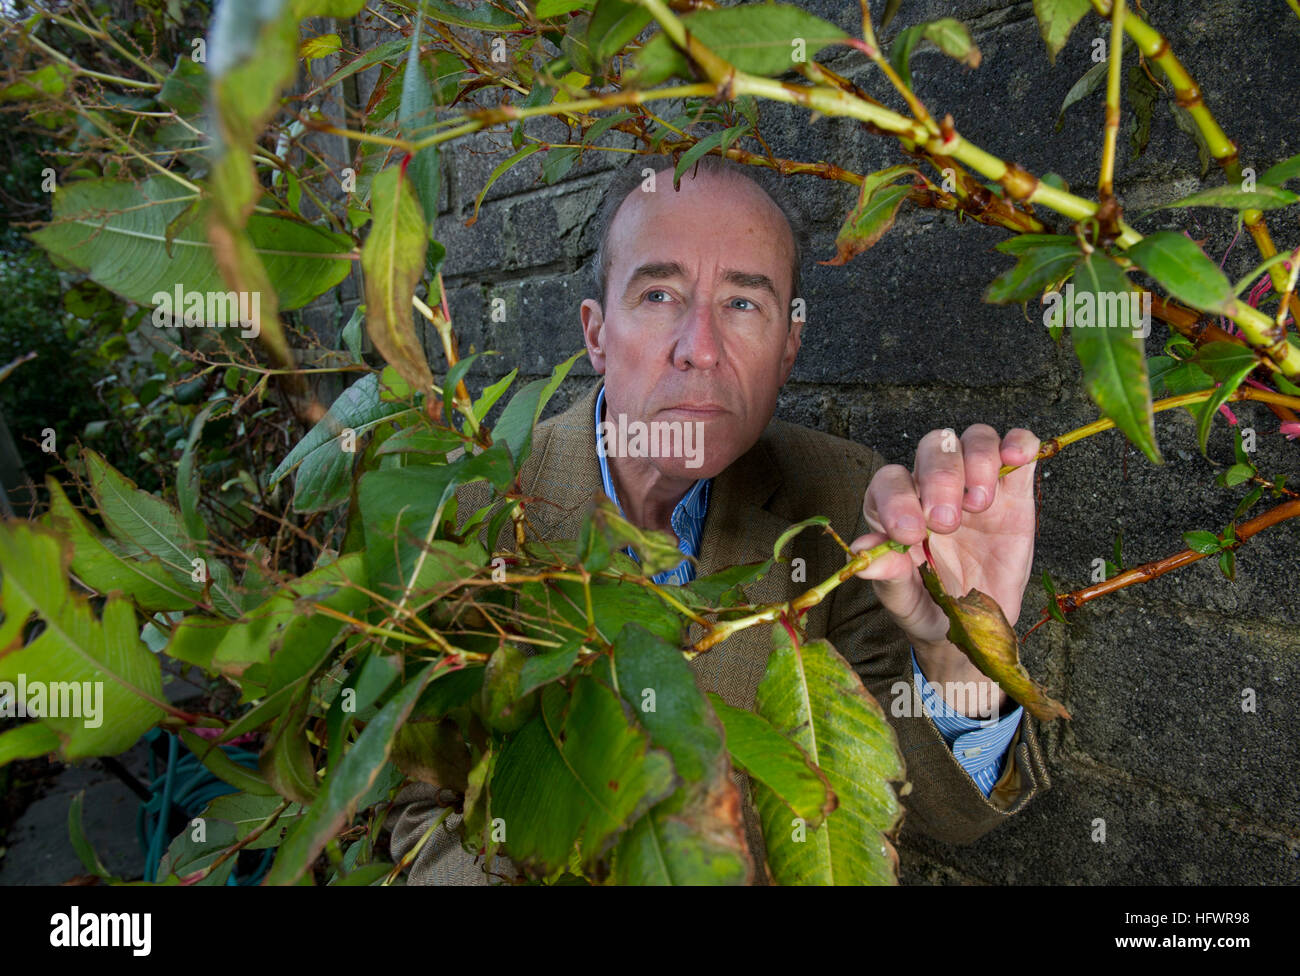 Paul & Teresa Hunter with the Himalayan knotweed invading their garden in Cornwall,UK. Stock Photo